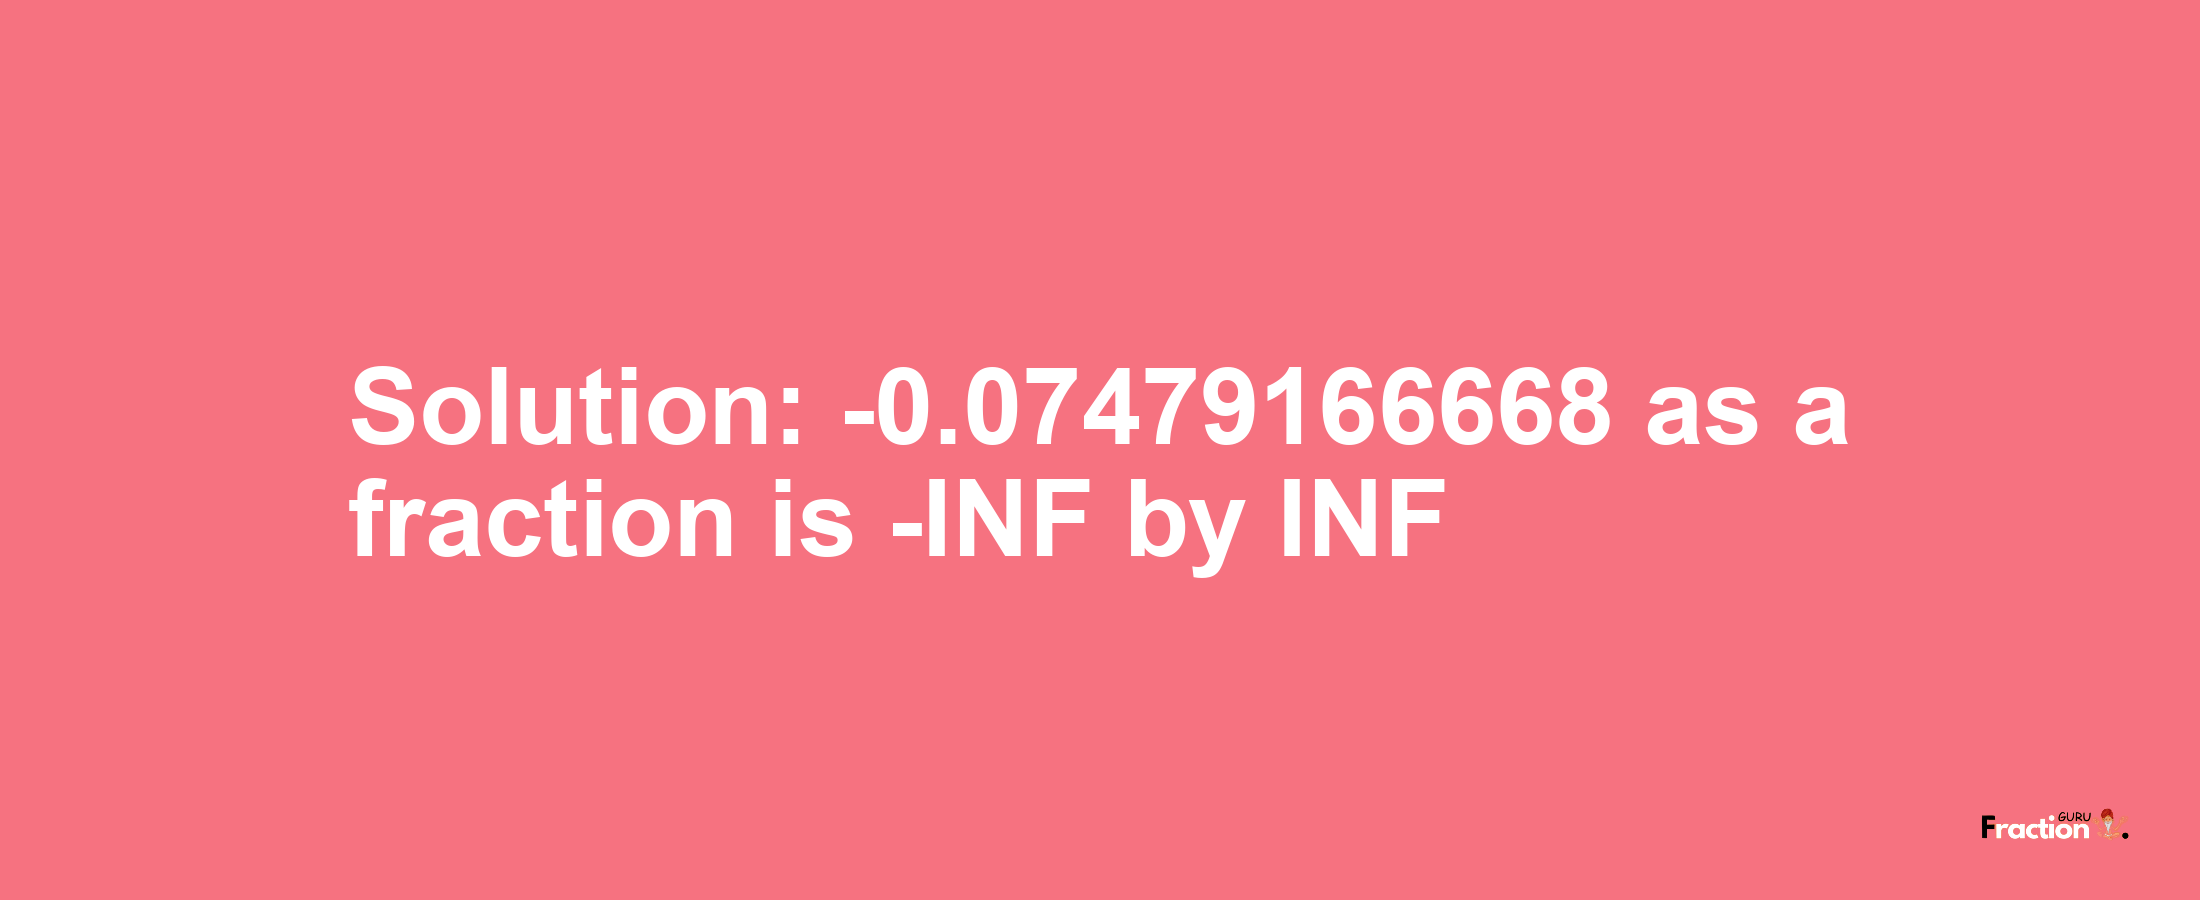 Solution:-0.07479166668 as a fraction is -INF/INF